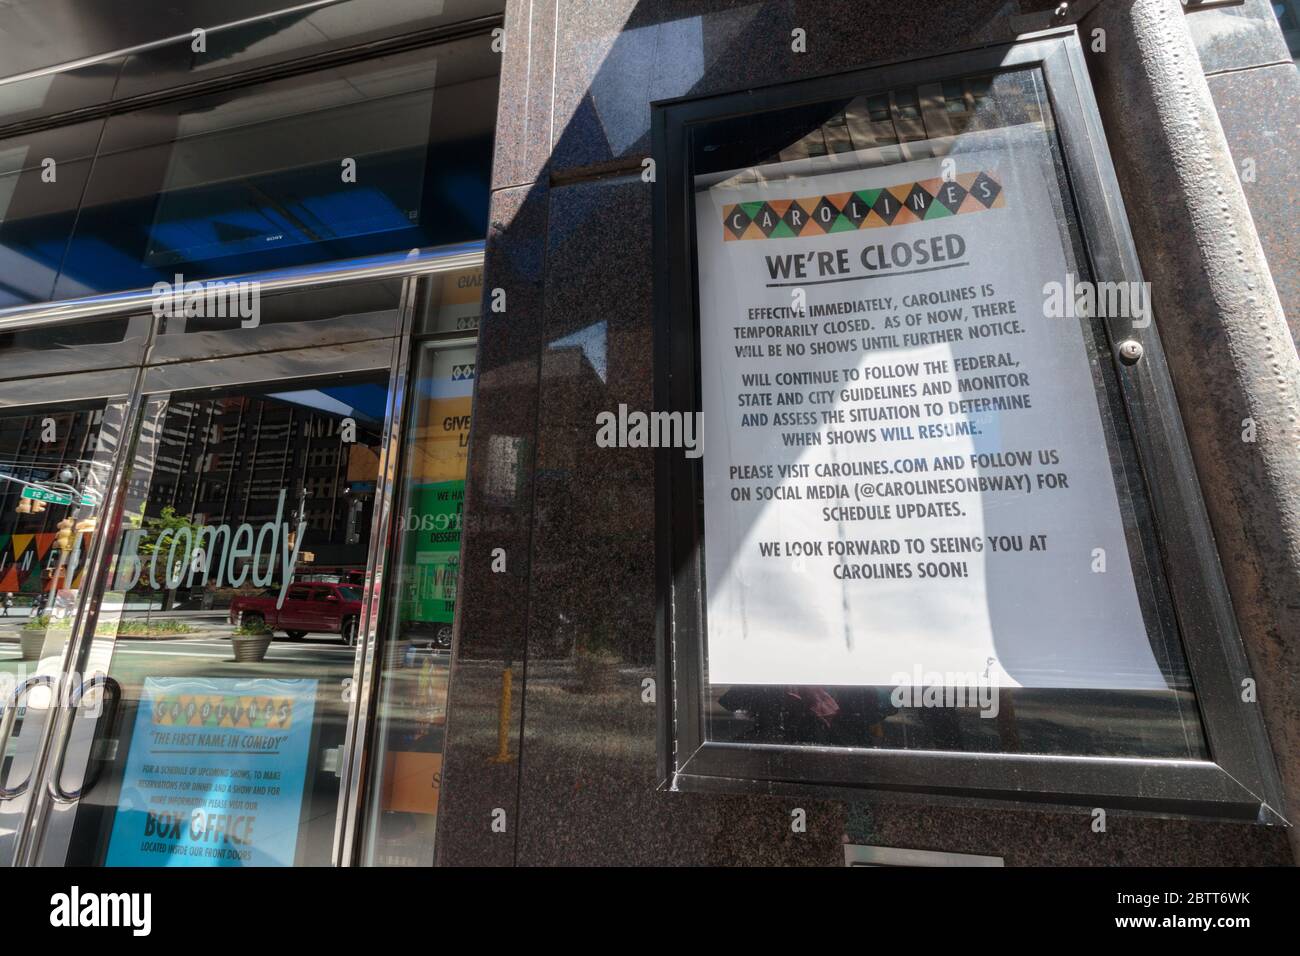 sign stating we're closed at Carolines on Broadway comedy club in Times Square due to the coronavirus or covid-19 pandemic Stock Photo